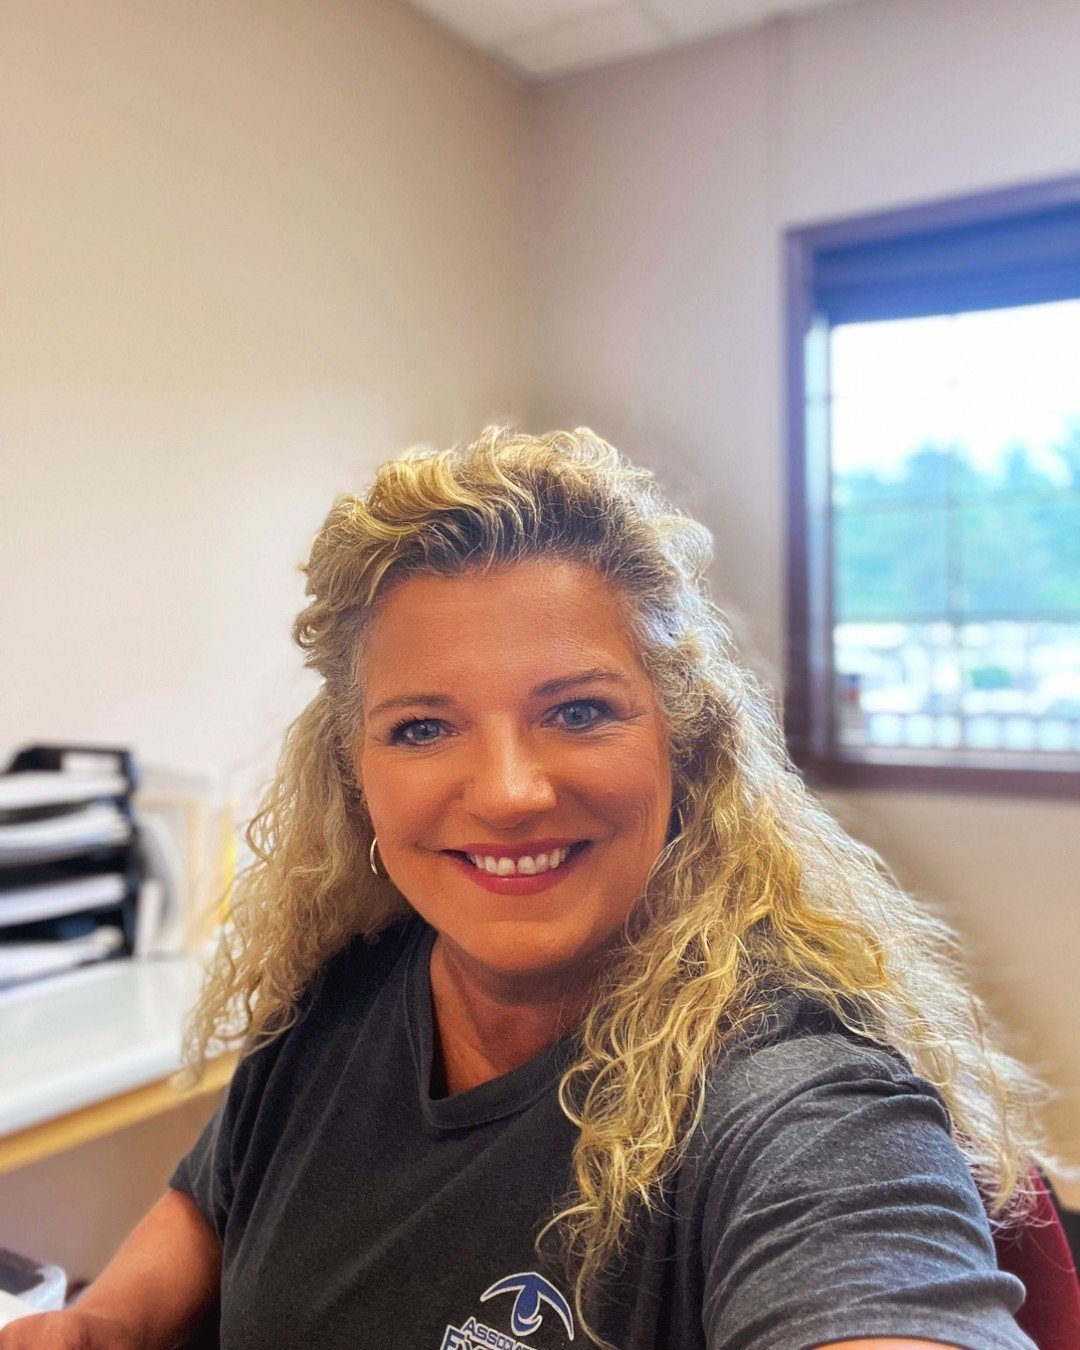 Shoutout to Sherry Hamlin Baker our AEC Office Manager who helps Whitley City #seemuchbetter! When you see her be sure to wish her a very happy birthday! #associatesineyecare #eyecare #whitleycityky #optometry